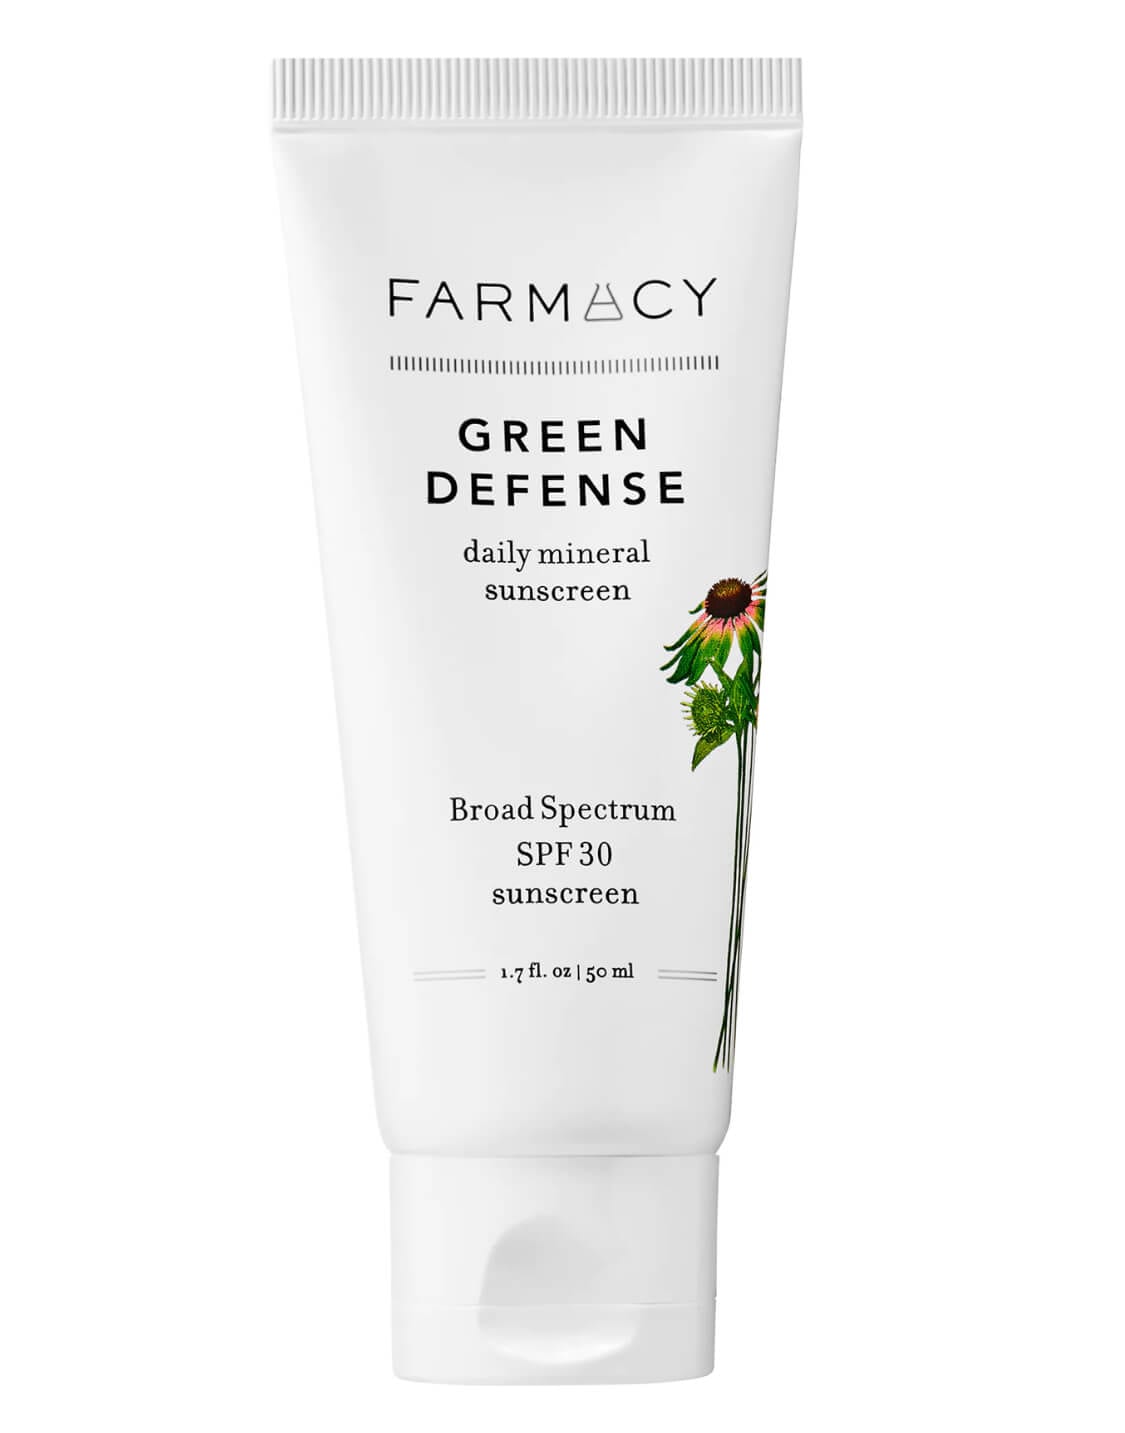 Green Defense Daily Mineral Sunscreen SPF 30 by Farmacy